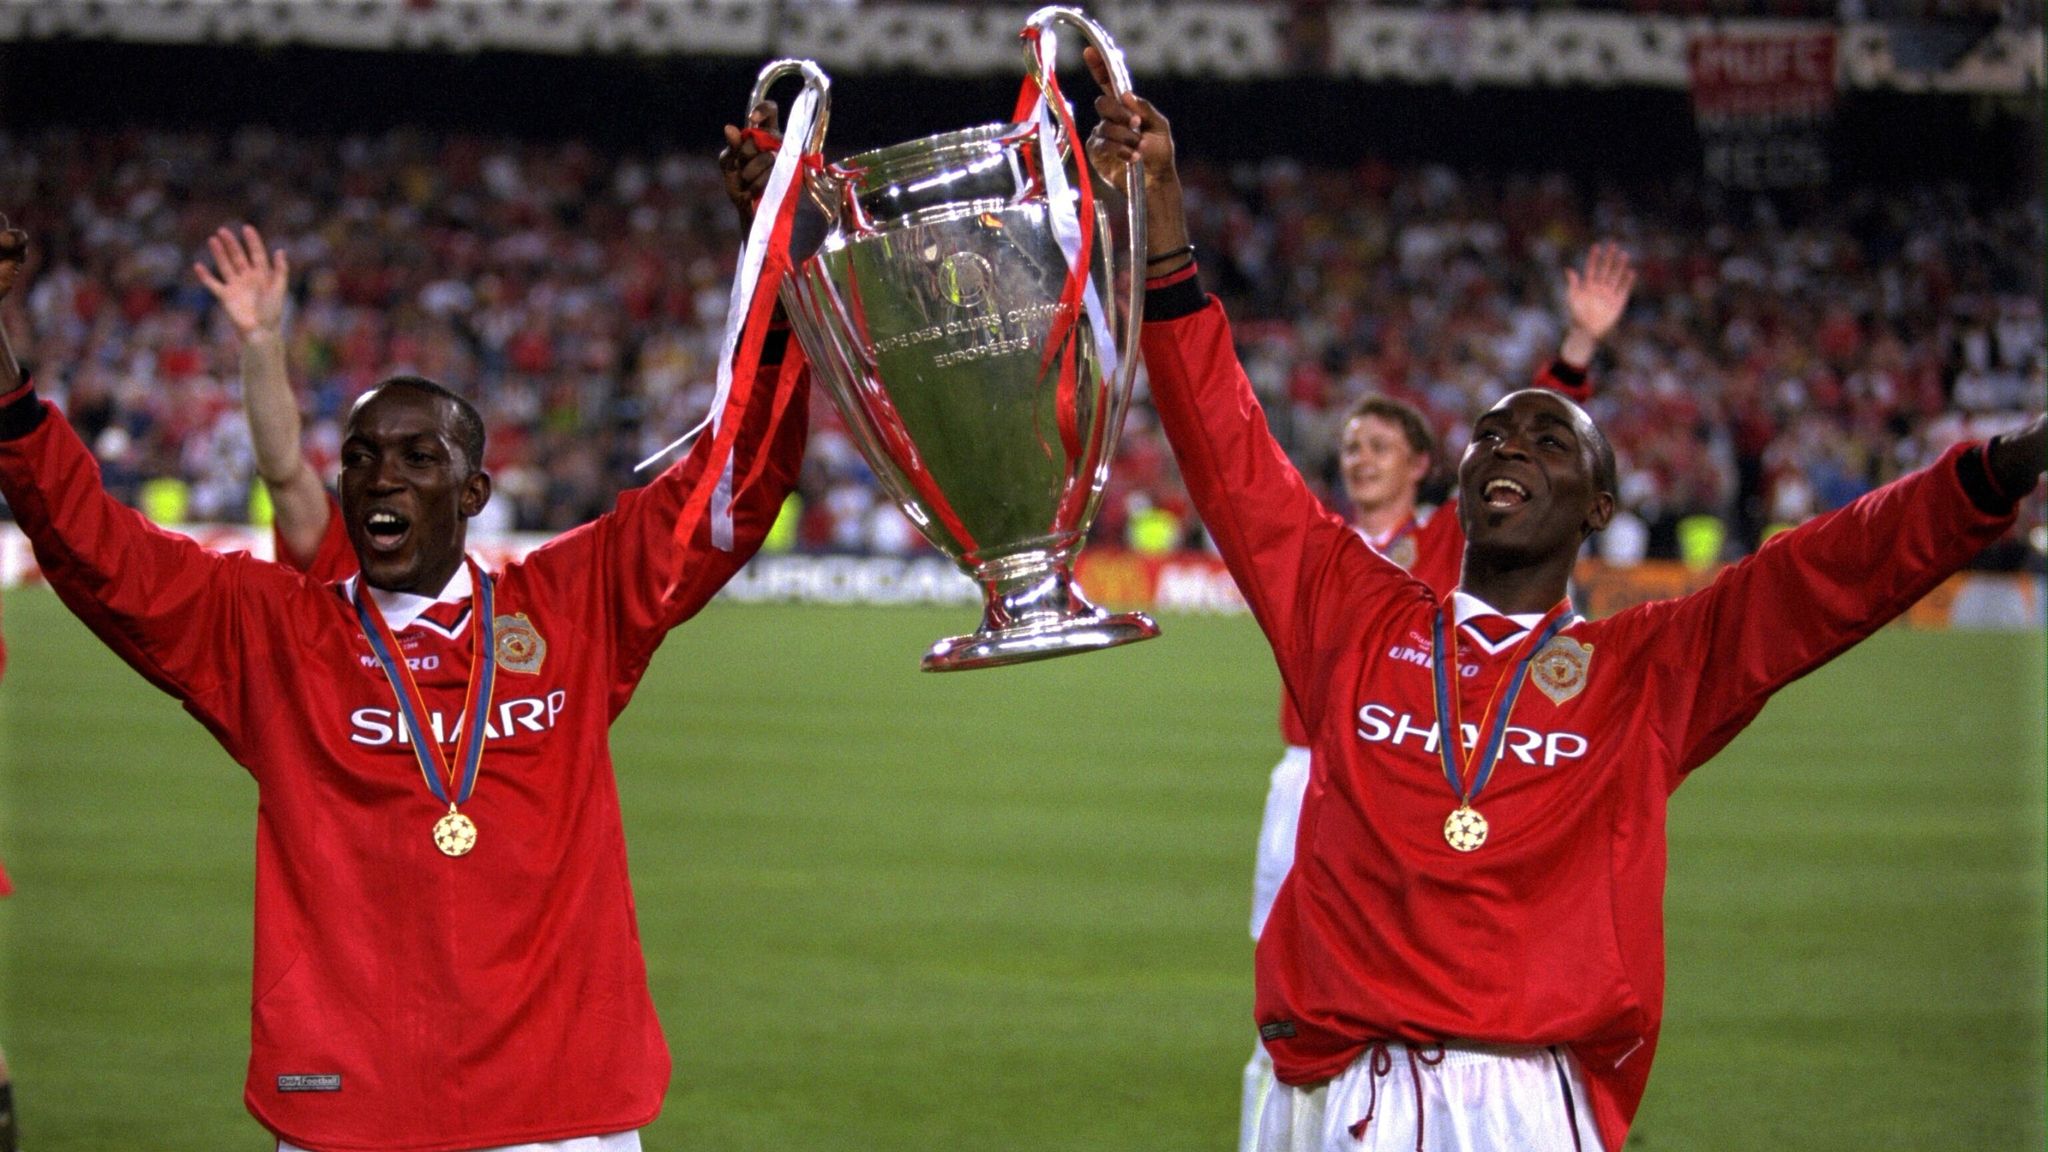  Dwight Yorke and Andy Cole celebrate winning the Champions League with Manchester United in 1999.